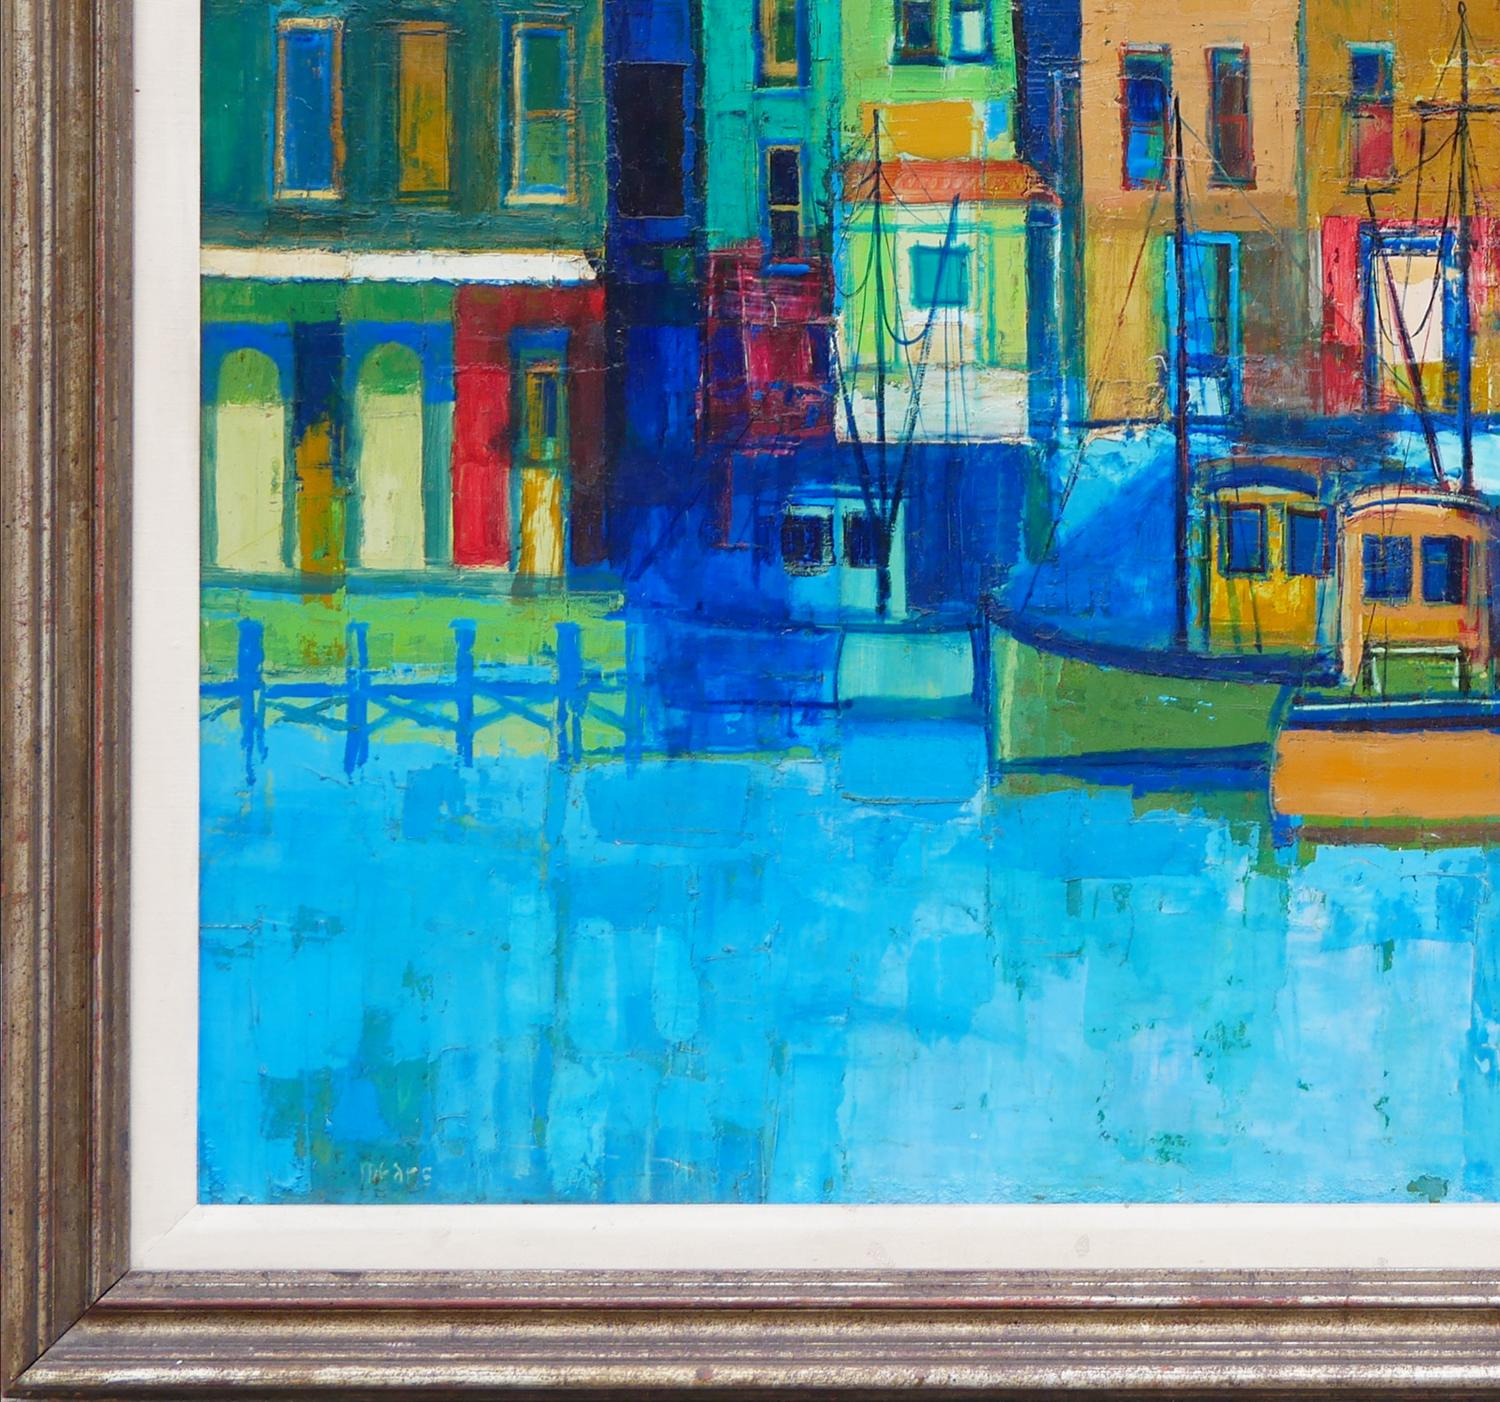 Modern Blue-Toned Abstract Coastal Cityscape Landscape with Boats at a Dock - Brown Abstract Painting by Herb Mears